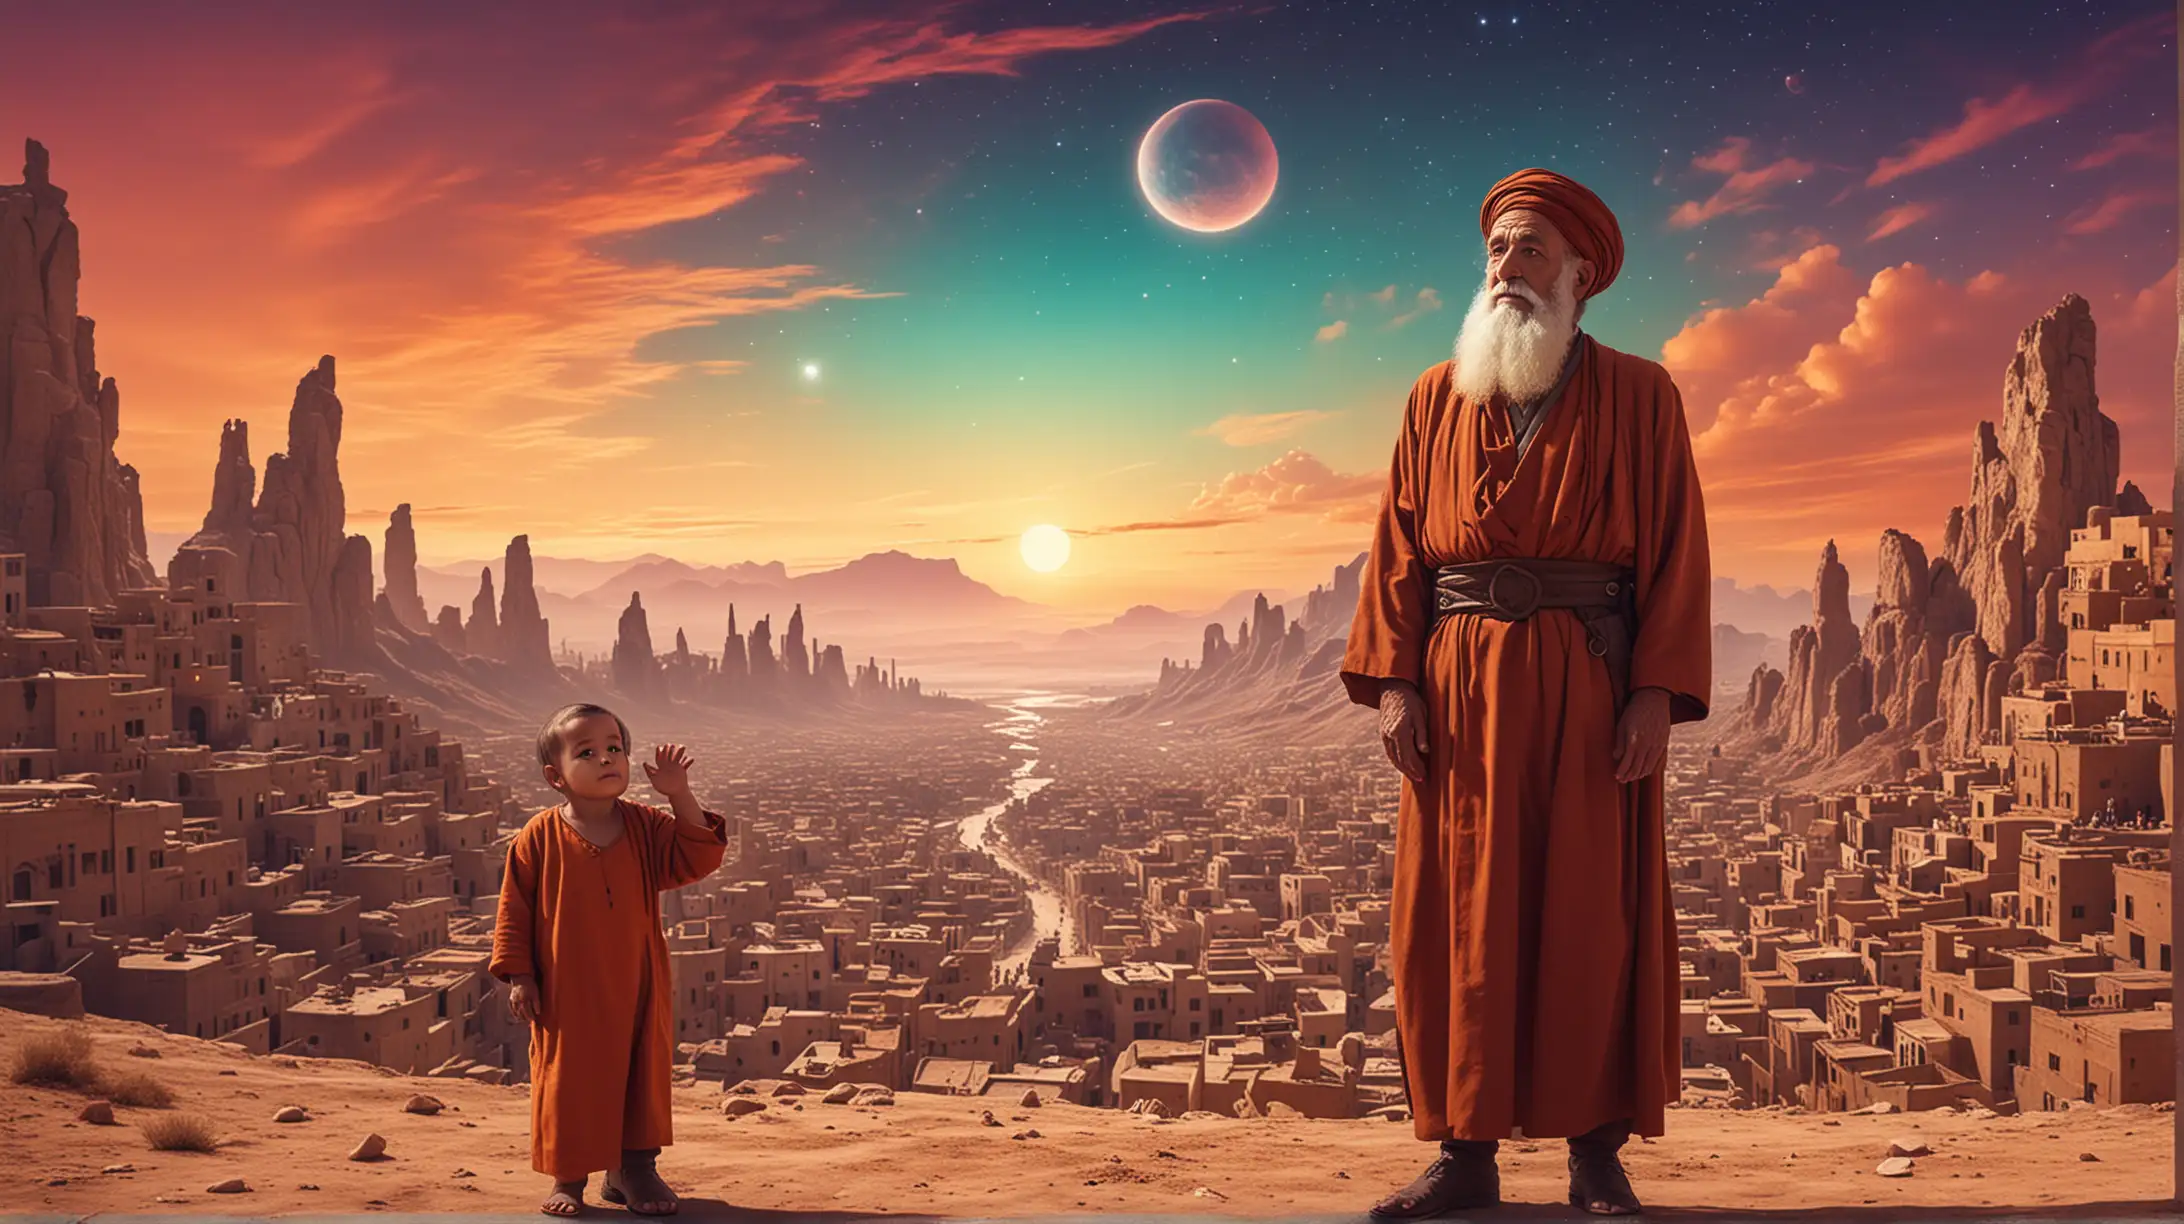 Baby Ismael, With His Father Abraham about 100 years old, Ancient Biblical world, Futuristic cityscapes. Vibrant colors and gradients. Surreal landscapes. Portraits. Celestial bodies.